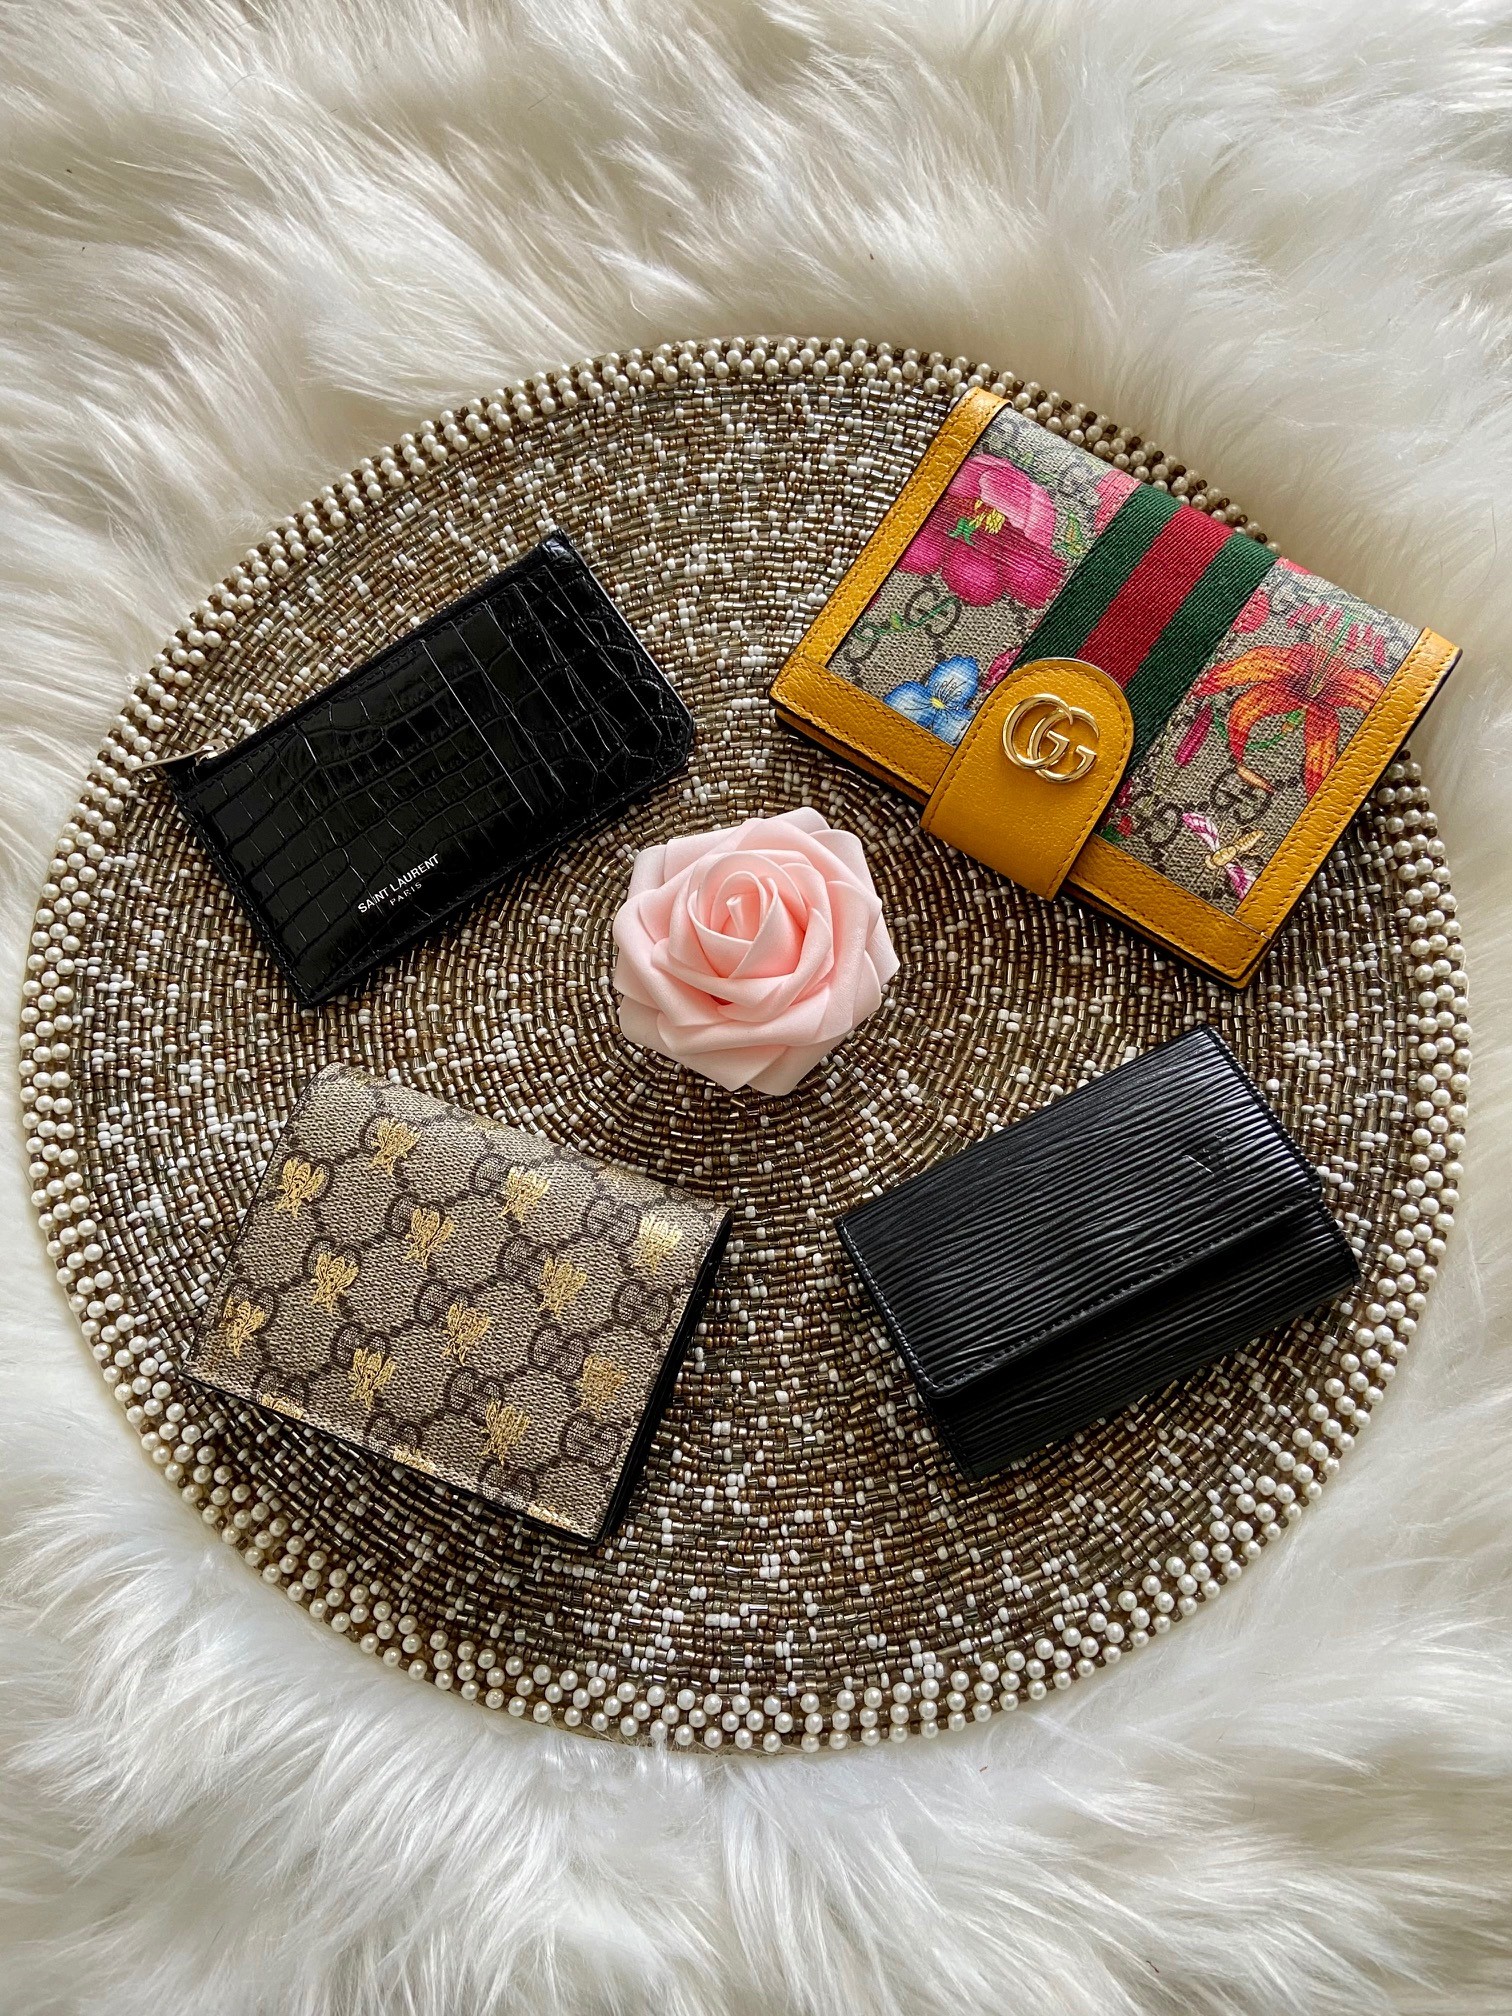 Review: Luxury Small Leather Goods - Allure By Tess